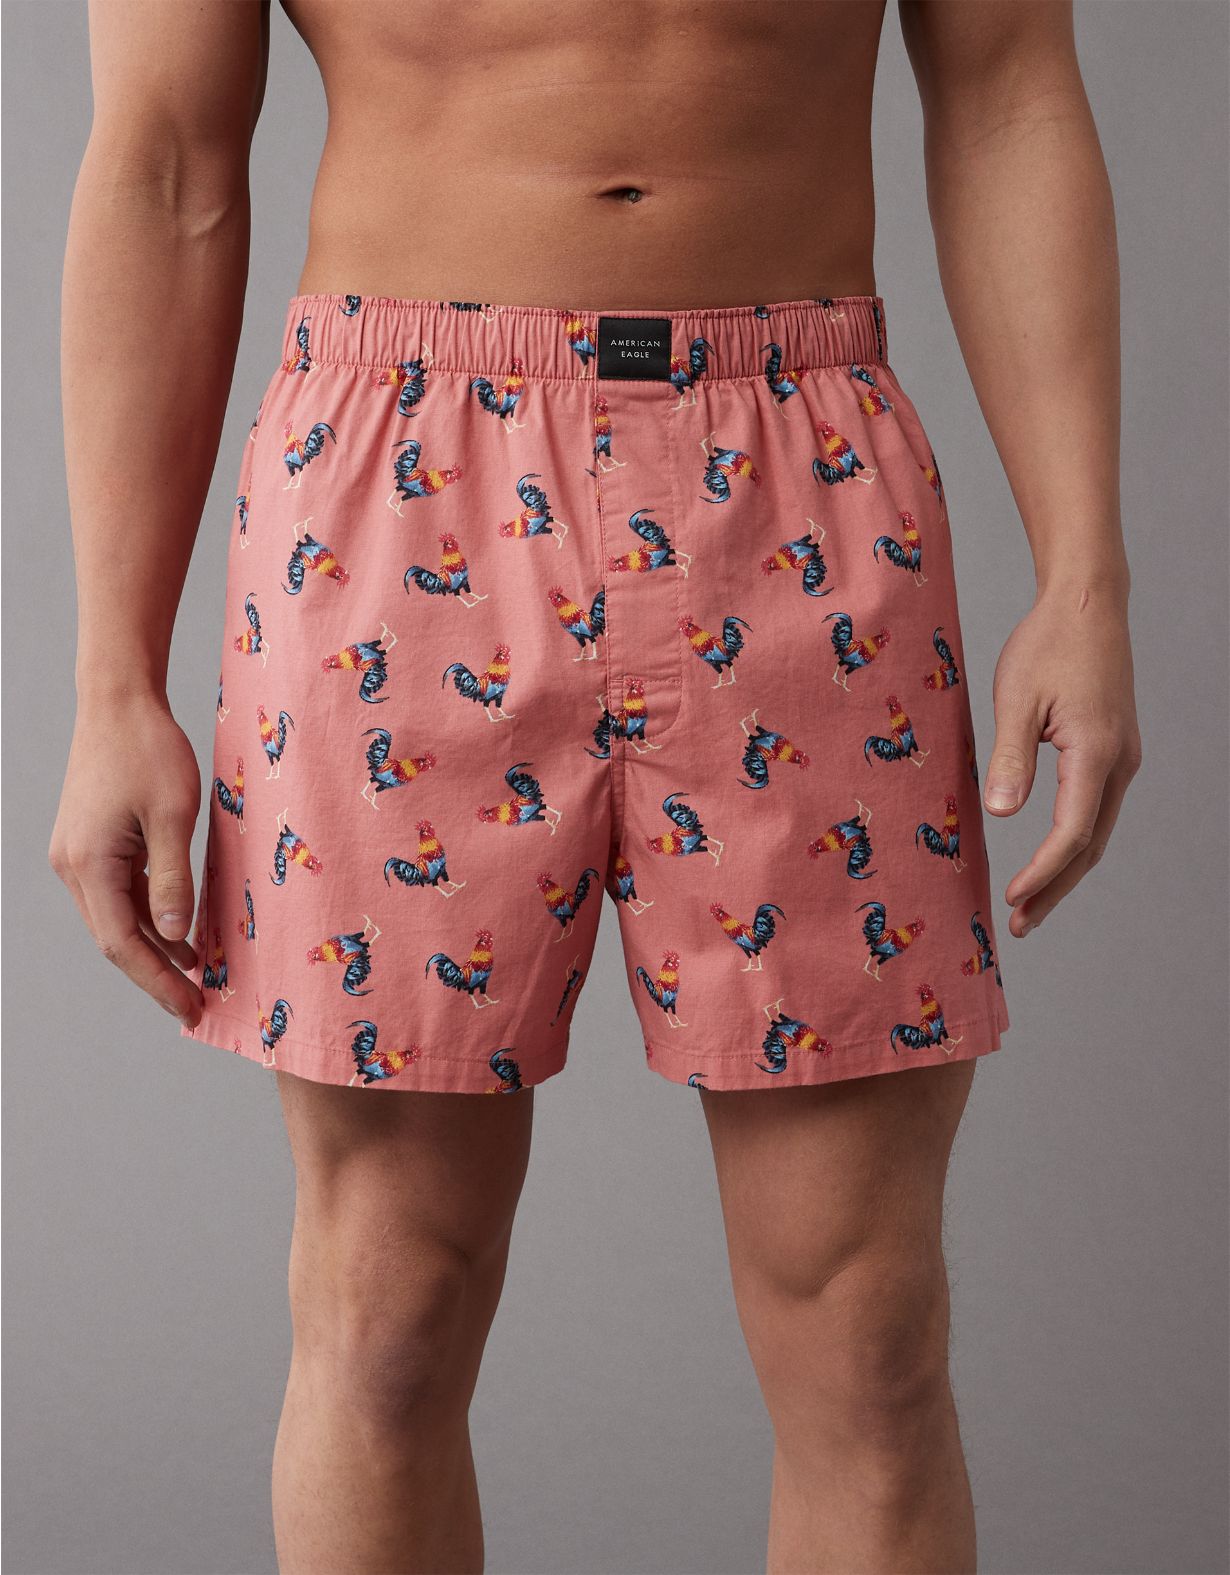 AEO Roosters Stretch Boxer Short